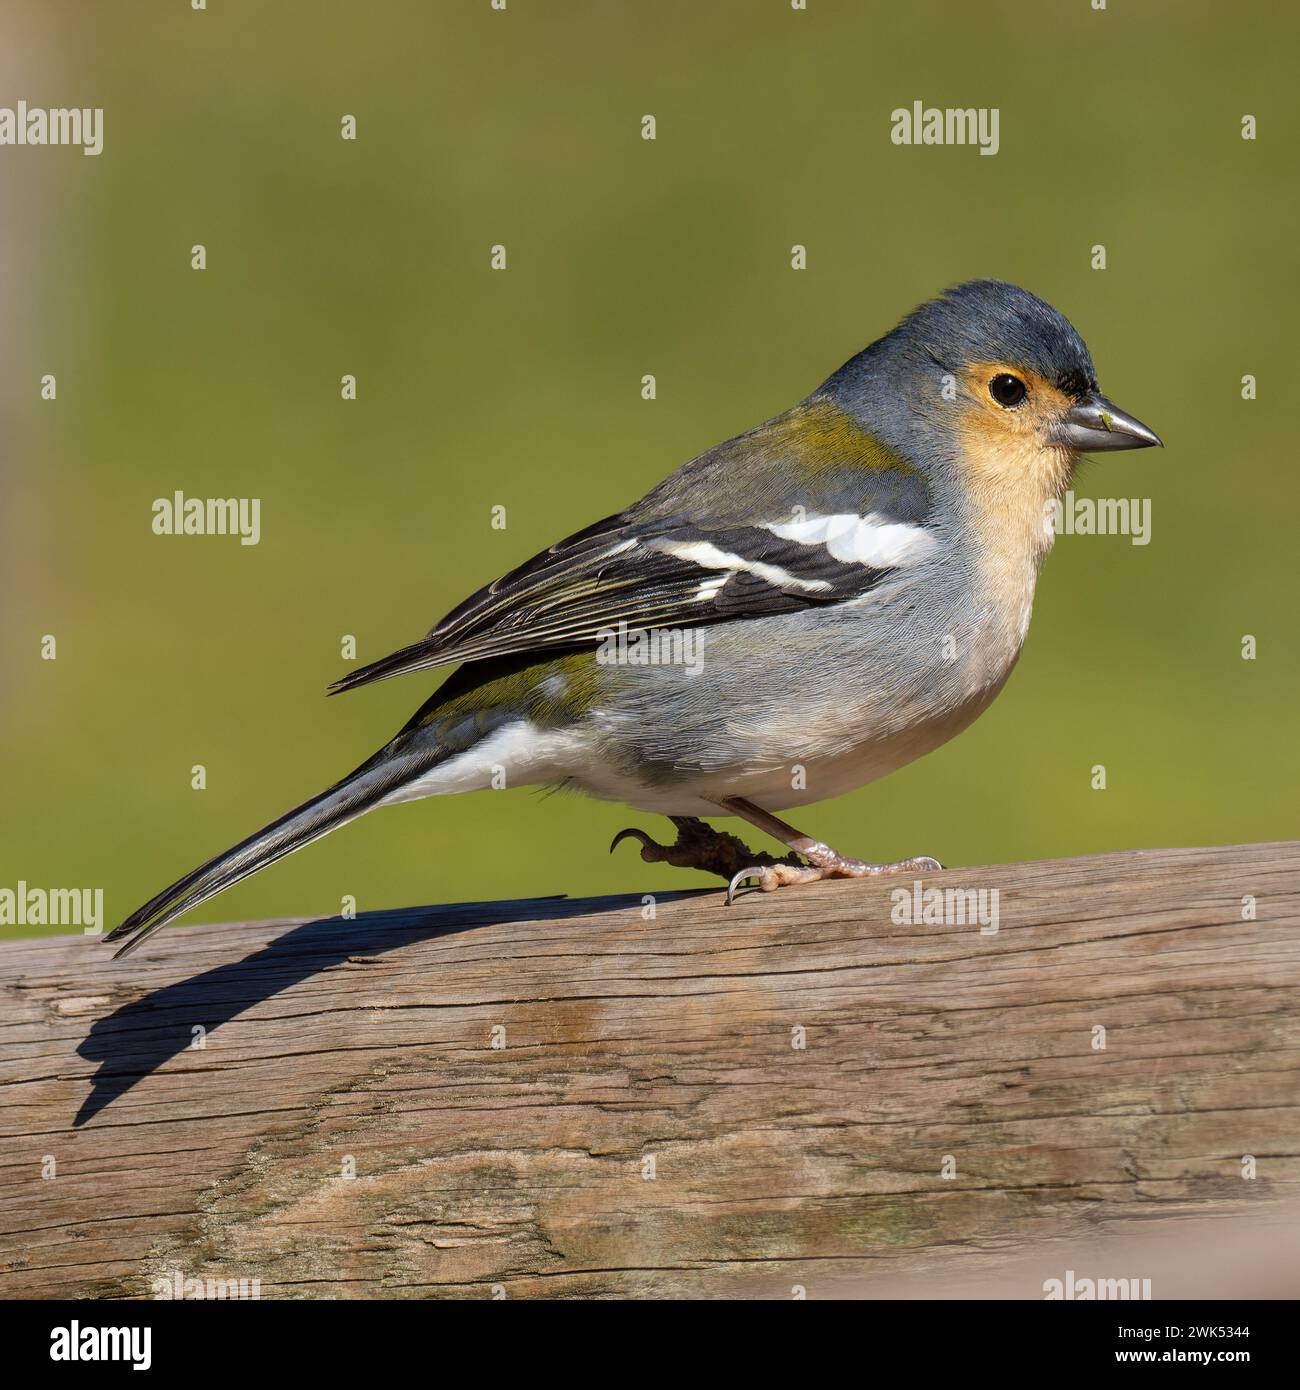 A male Madeiran chaffinch, Fringilla maderensis, which is endemic to the island of Madeira. Stock Photo